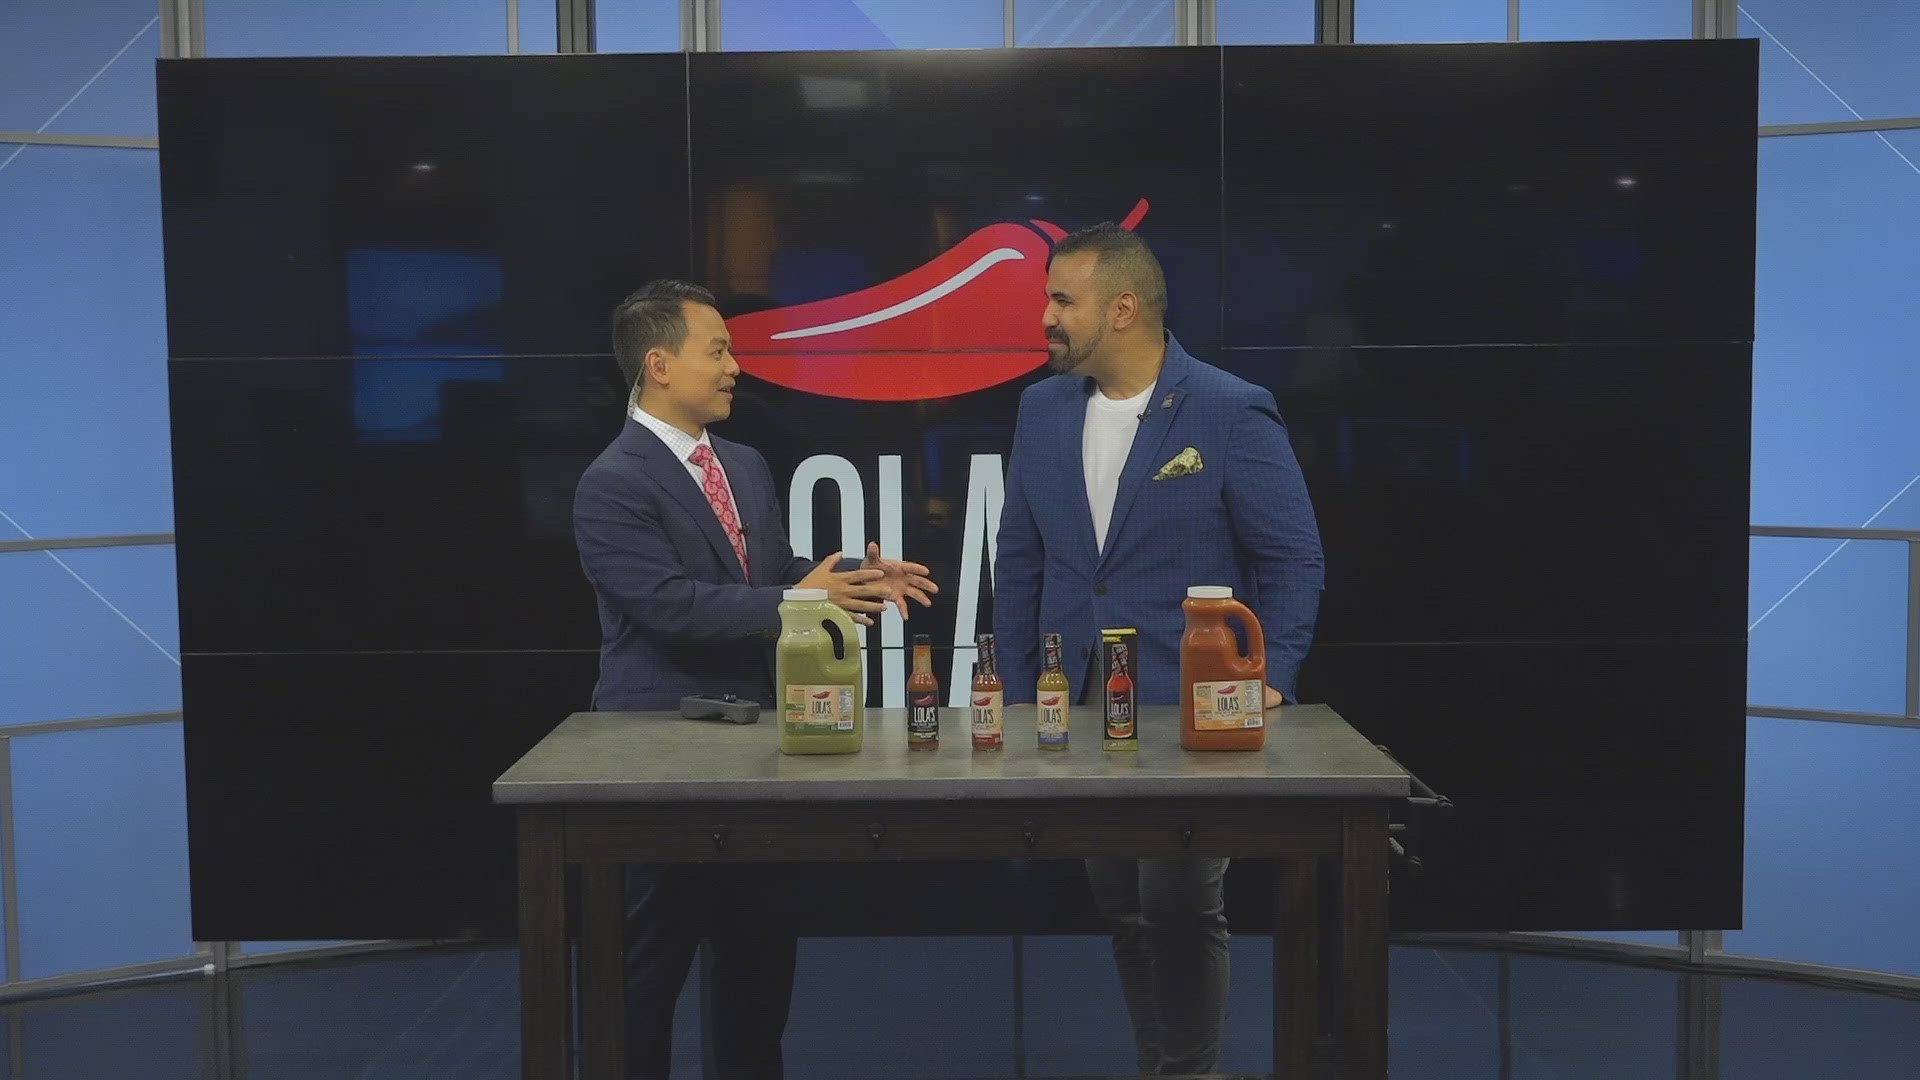 Taufeek Shah, CEO of Lola's Fine Hot Sauce, stopped by the Local 5 studio to talk about representing Iowa and its AAPI community at an USPAACC event/